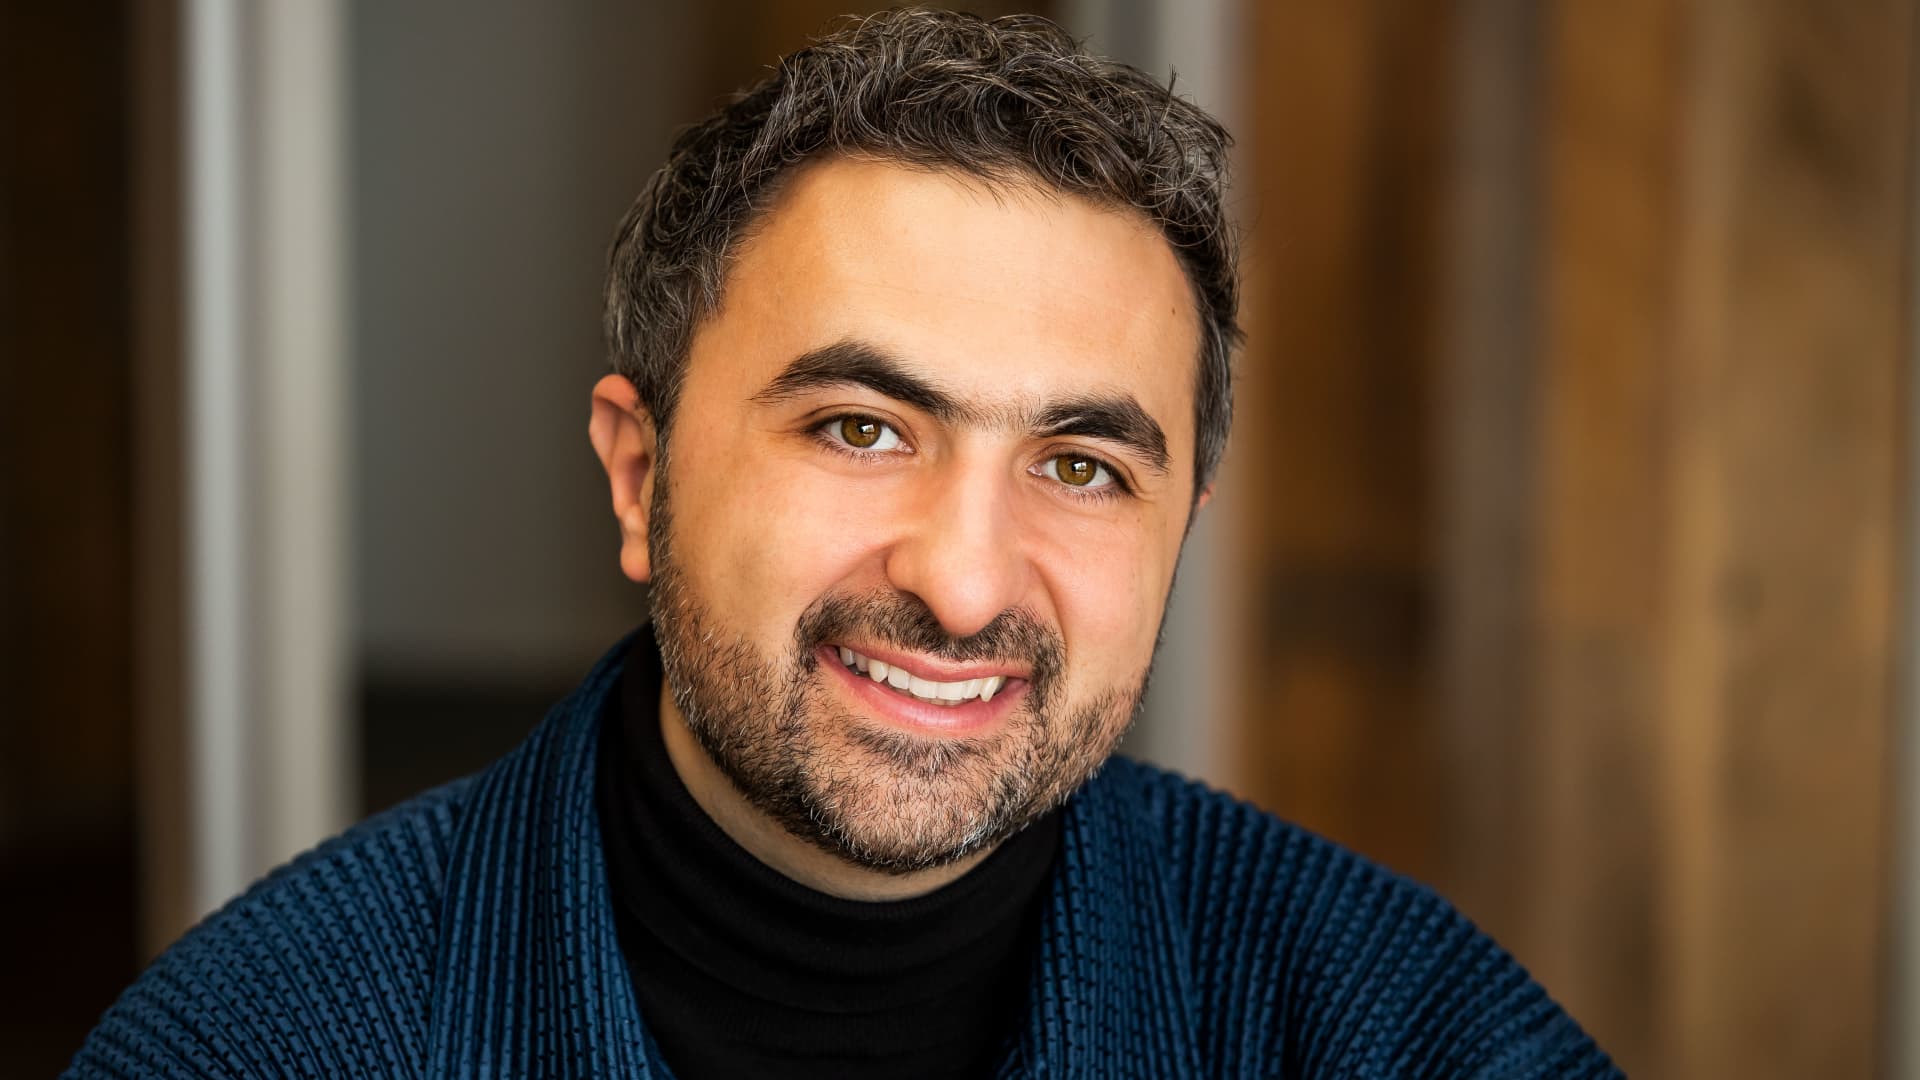 Inflection AI, the new artificial intelligence start-up from DeepMind co-founder Mustafa Suleyman and LinkedIn co-founder Reid Hoffman, has secured $2